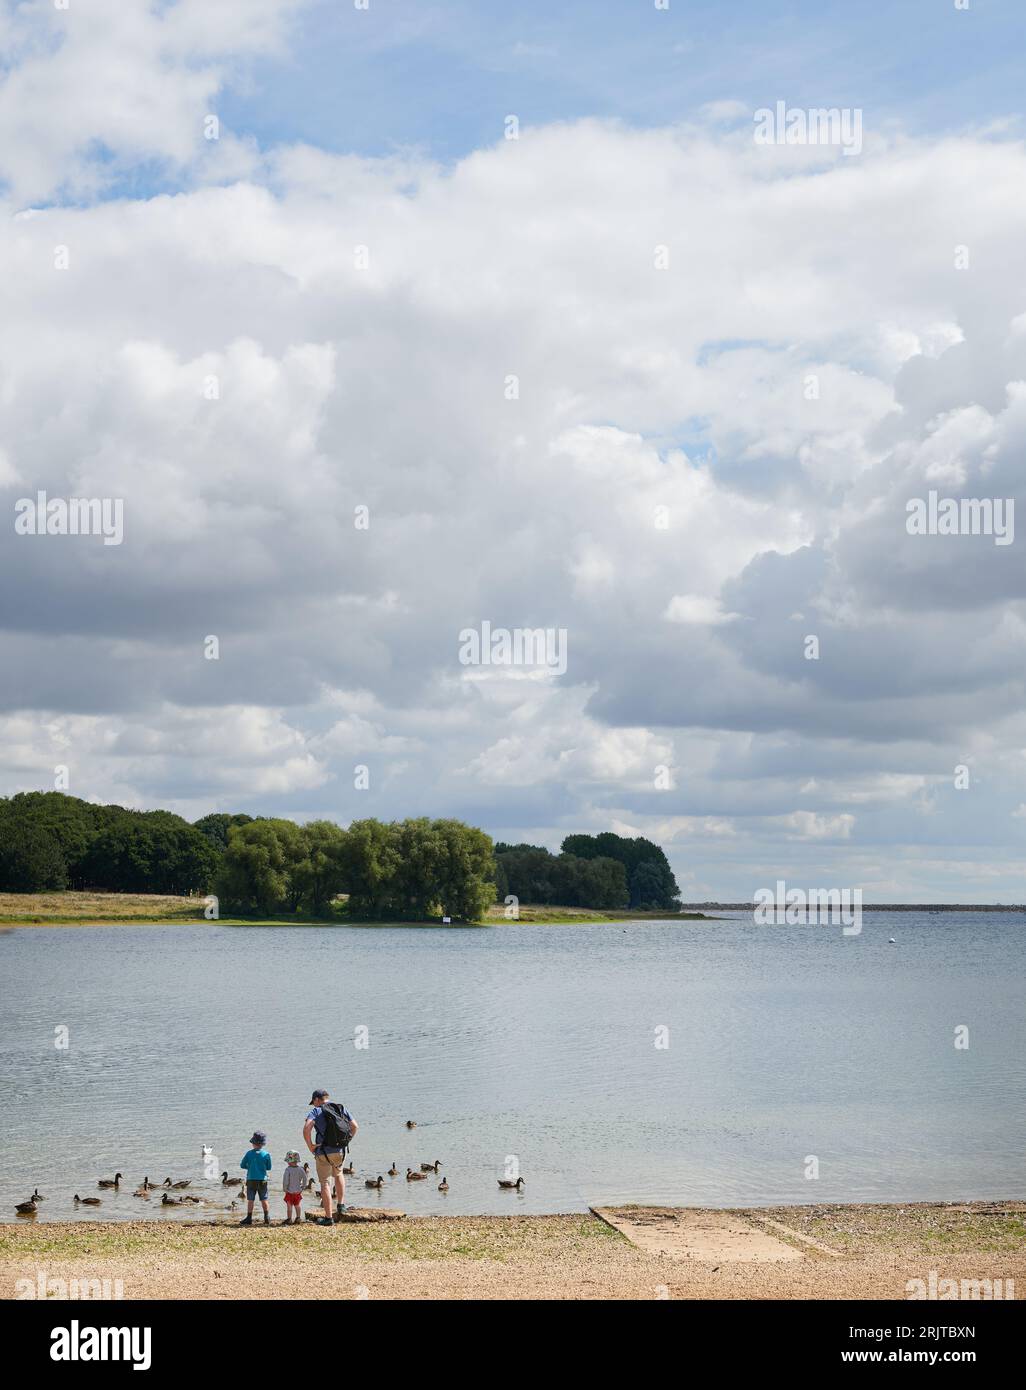 A family of father and two young sons stand at a lakeside watching ducks. Stock Photo